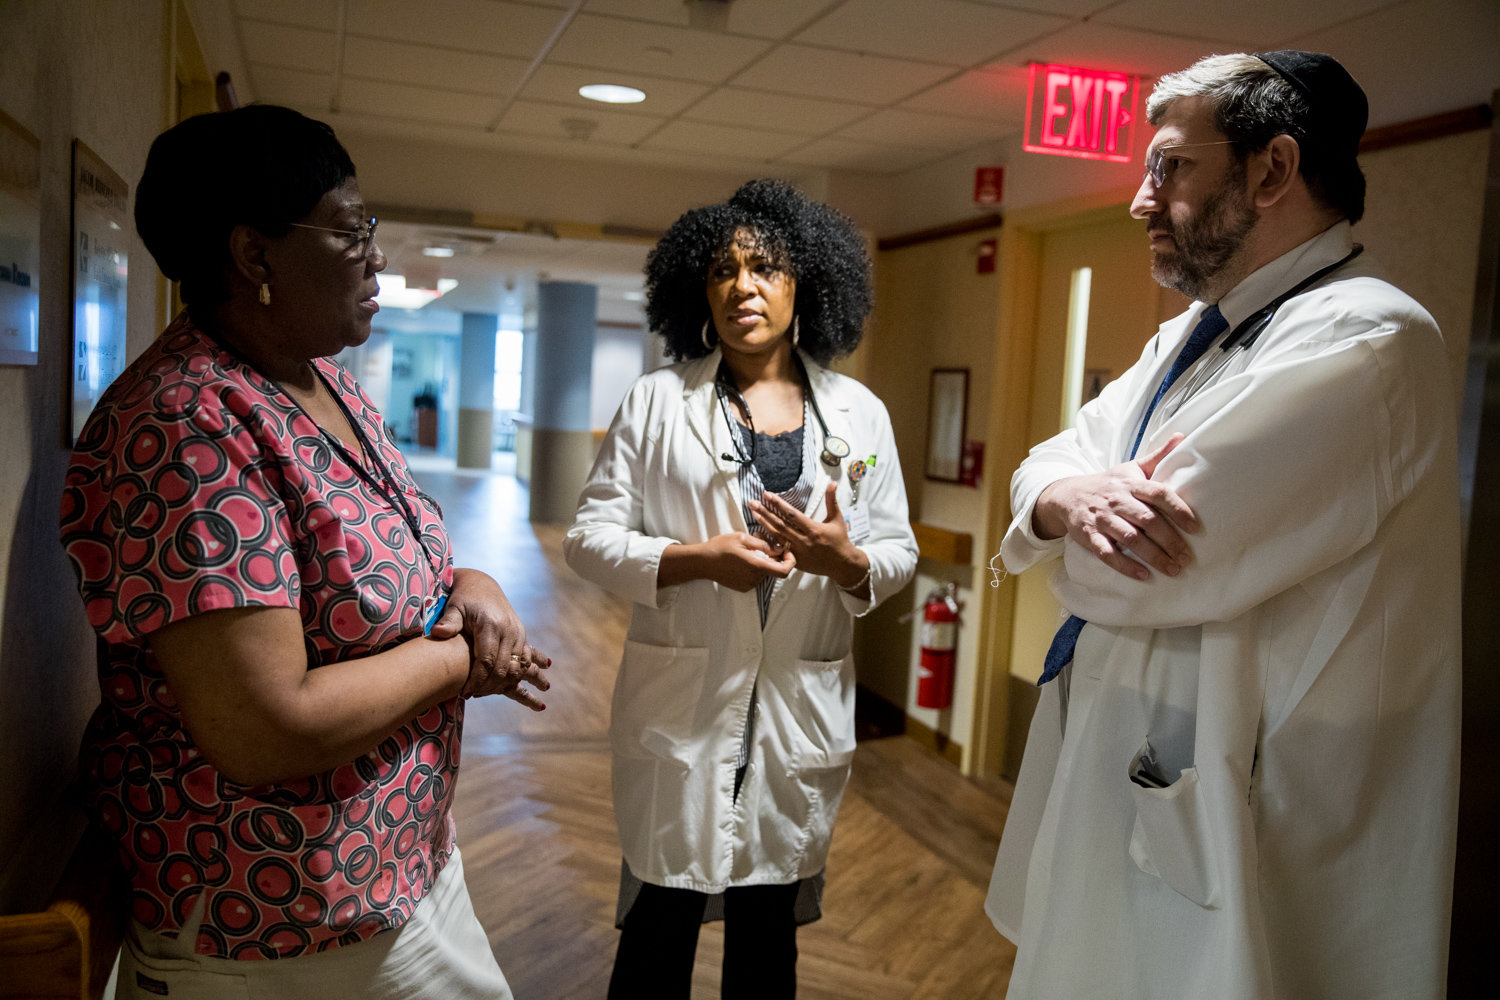 Patricia Salifu, a licensed practical nurse at the Hebrew Home at Riverdale, left, talks with nurse practitioner Sebrina Henderson and medical director Dr. Zachary Palace about a care plan for one of the Palisade Avenue facility’s residents.